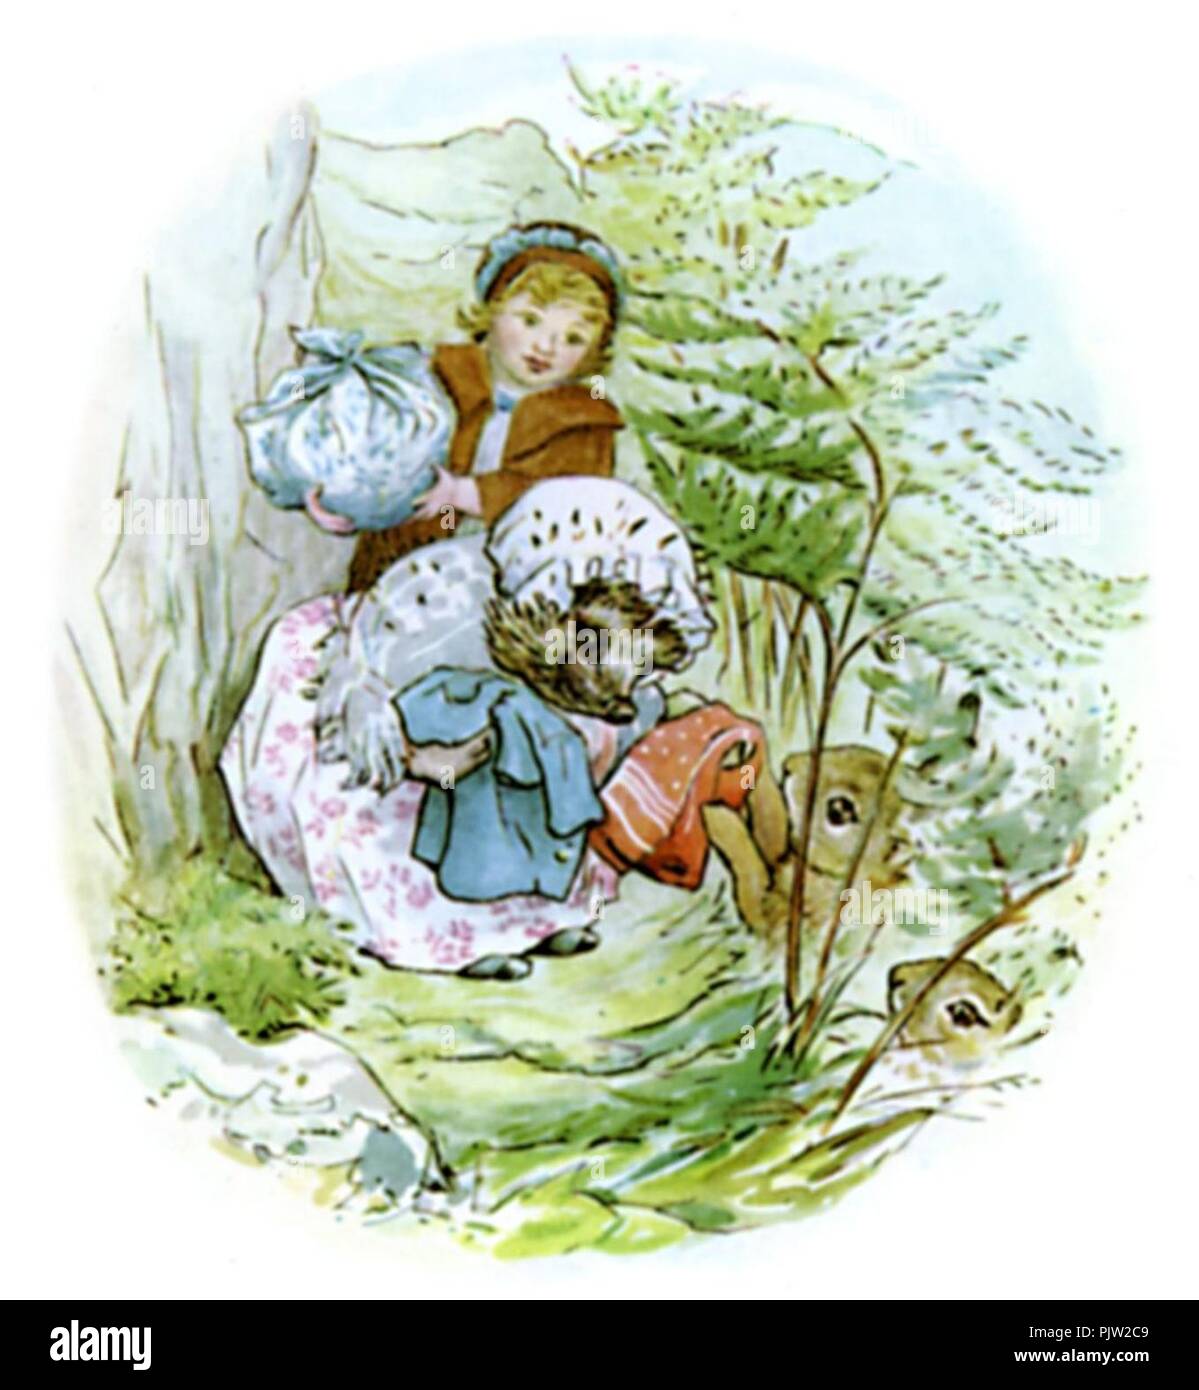 beatrix potter characters - Google Images  Beatrix potter illustrations, Beatrix  potter, Peter rabbit and friends